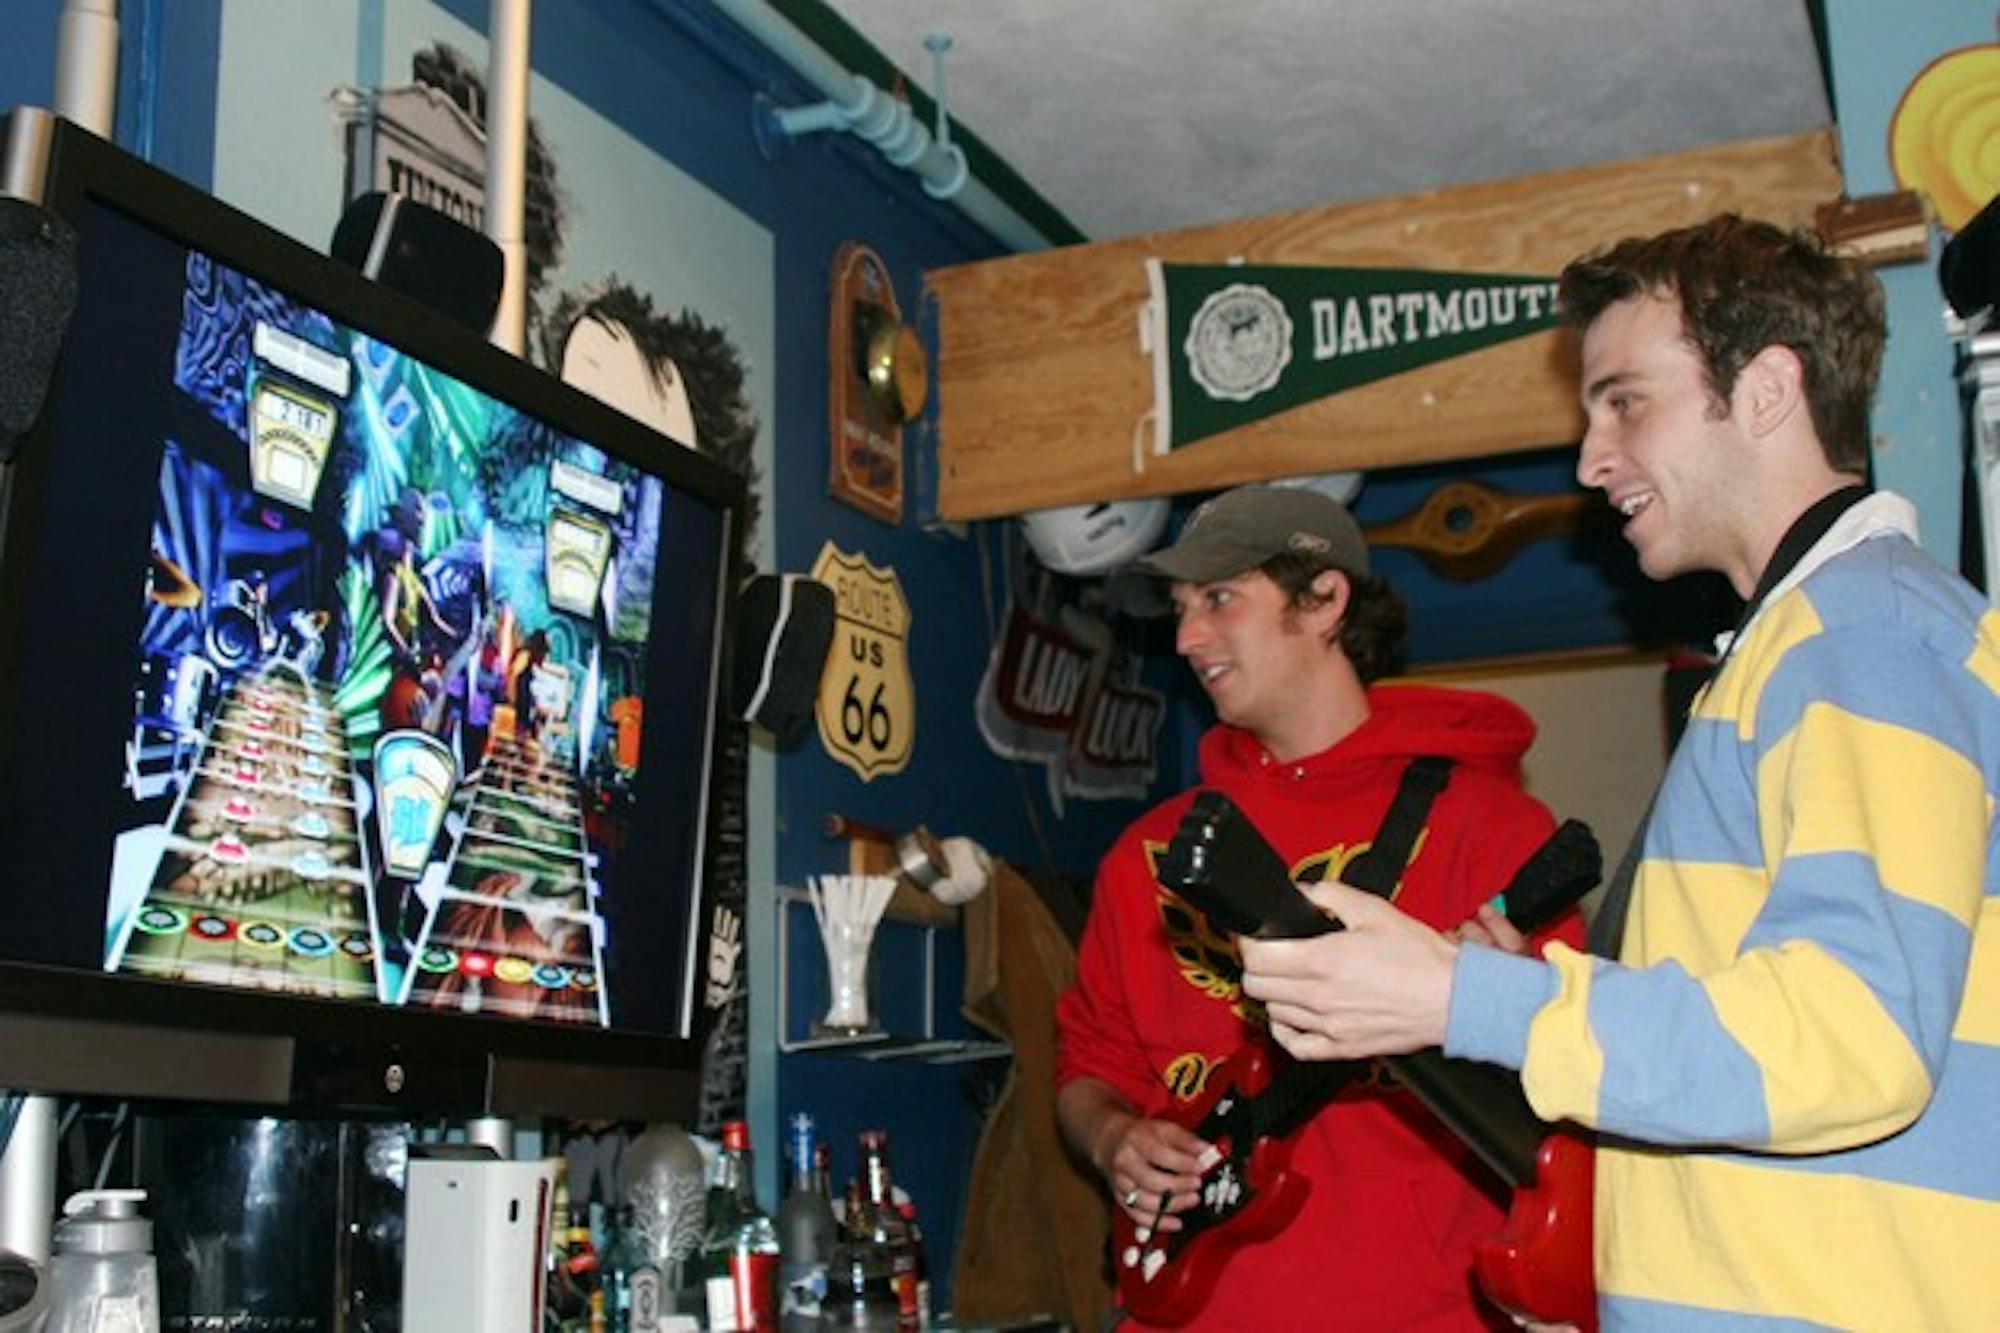 Brian Christie '07 and Brian Lloyd '08 compete in multi-player mode, using separate guitar-shaped 